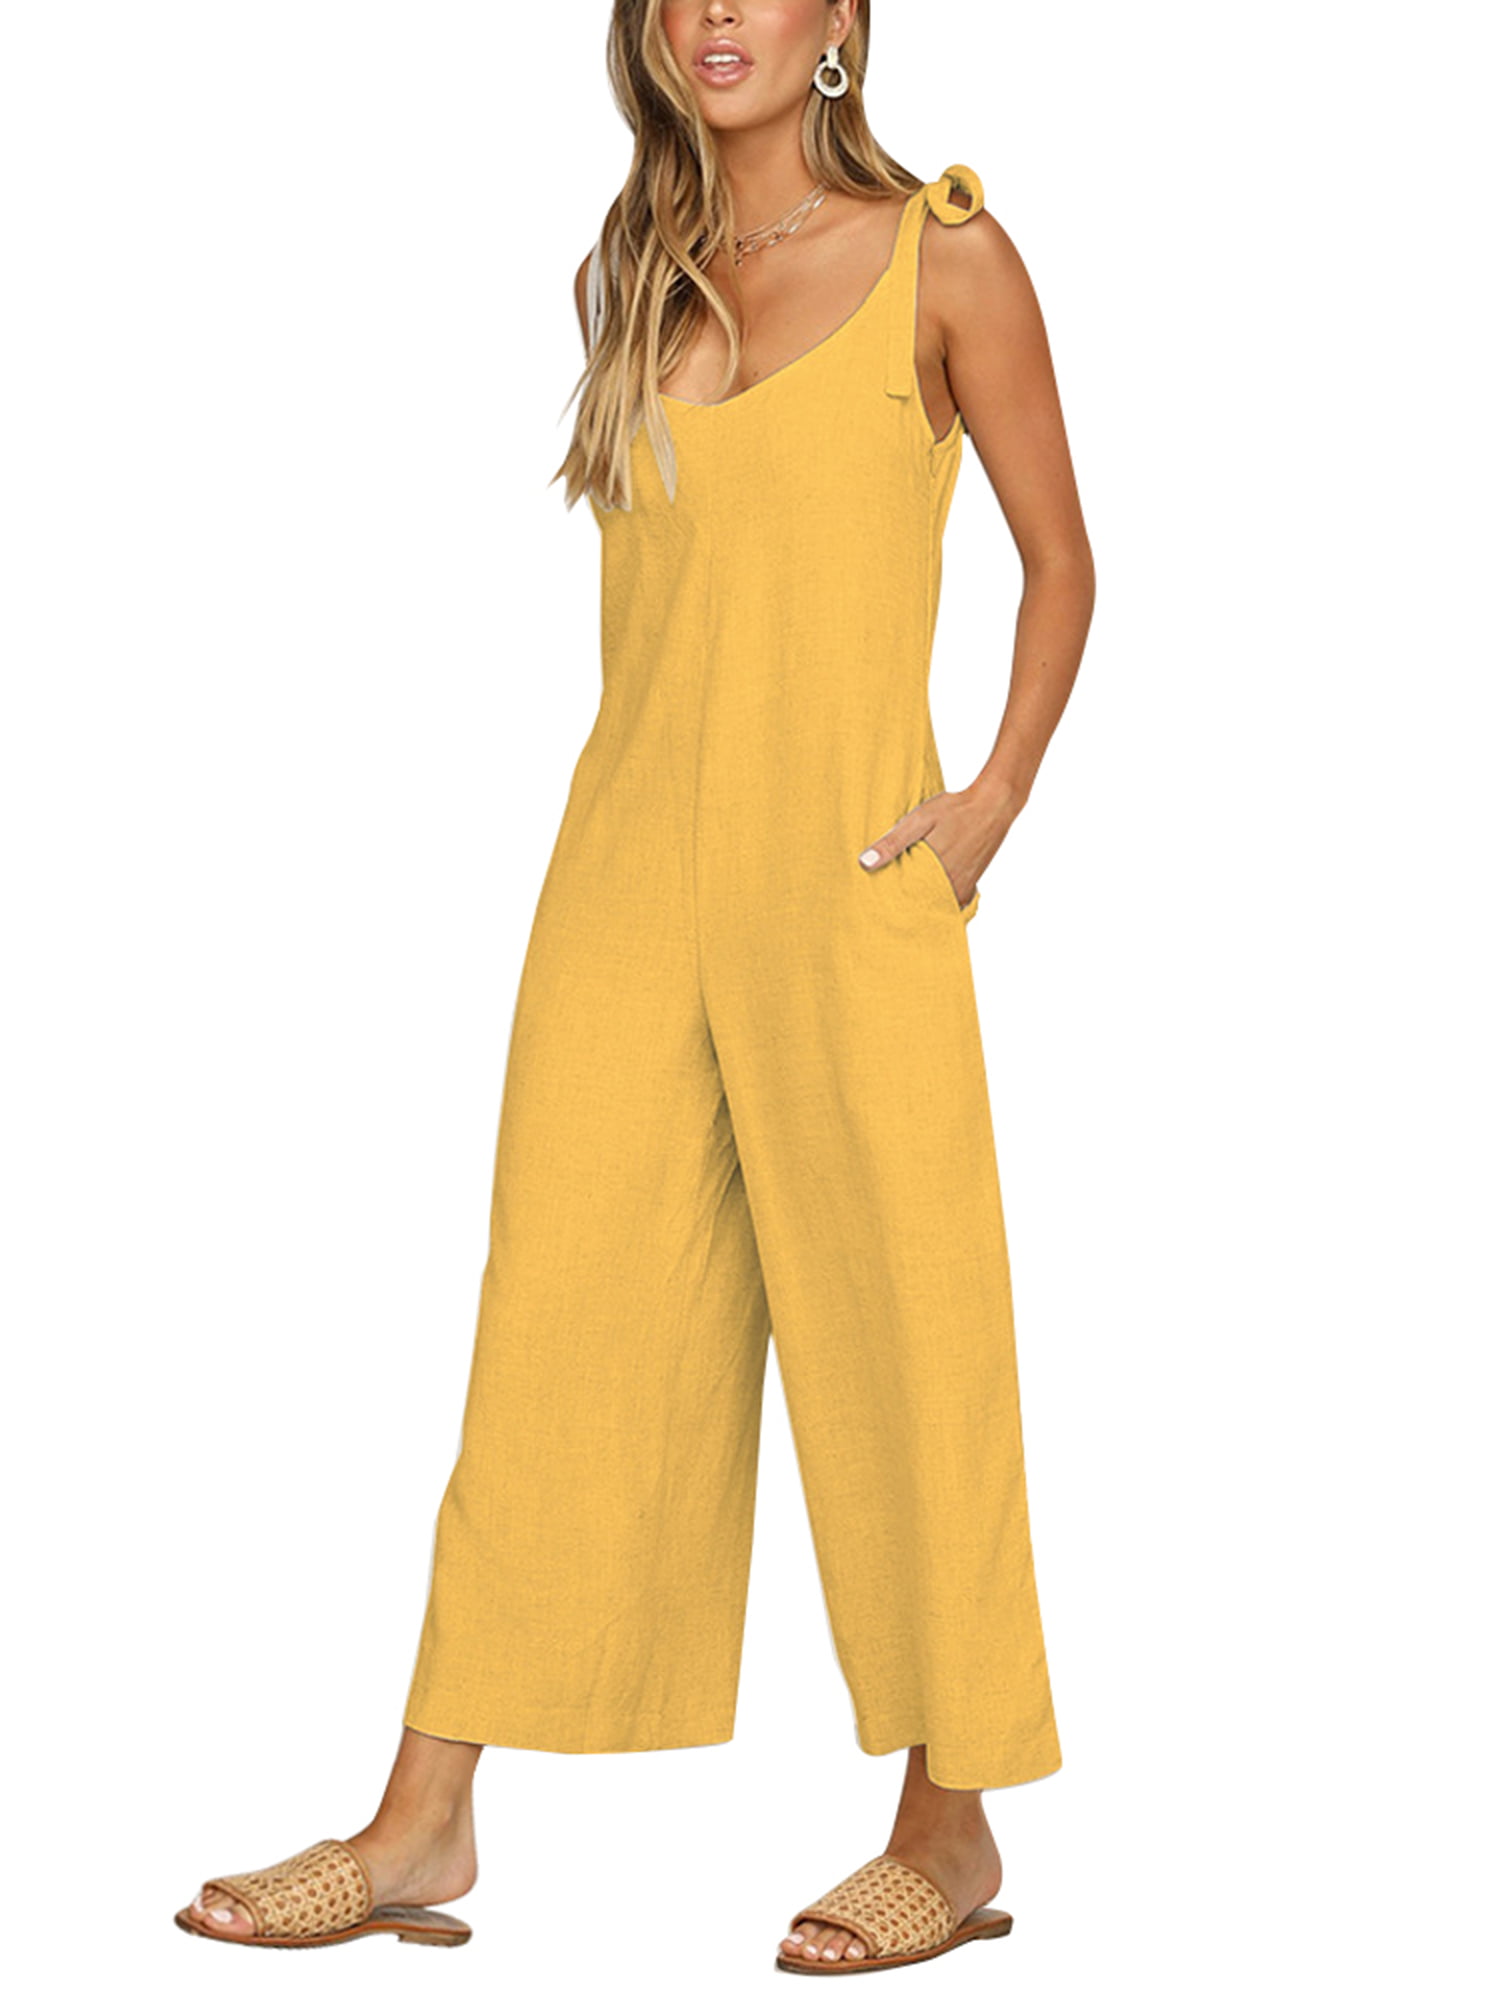 VONDA Women's Jumpsuits Strappy Dungarees Casual Loose Overalls Wide Leg Playsuit Rompers